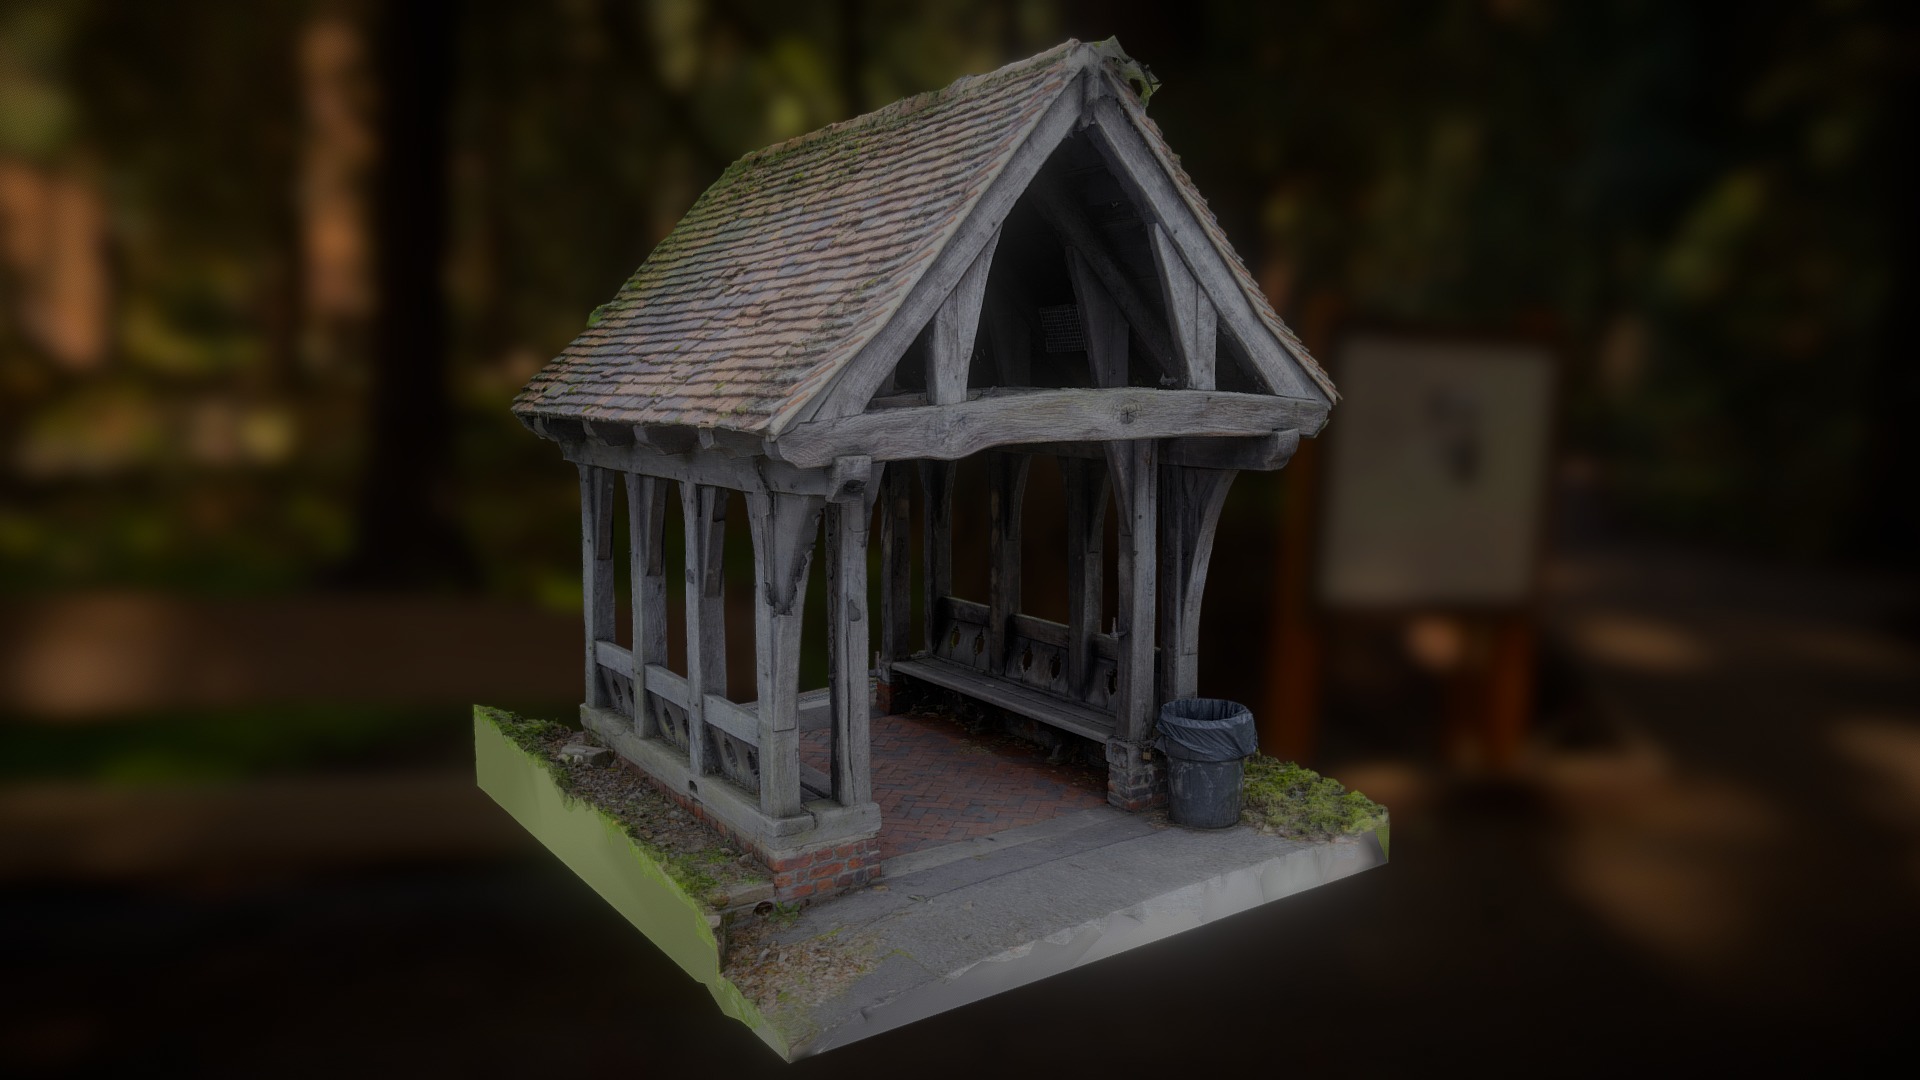 3D model The Lych Gate - This is a 3D model of the The Lych Gate. The 3D model is about a wooden birdhouse on a wood table.